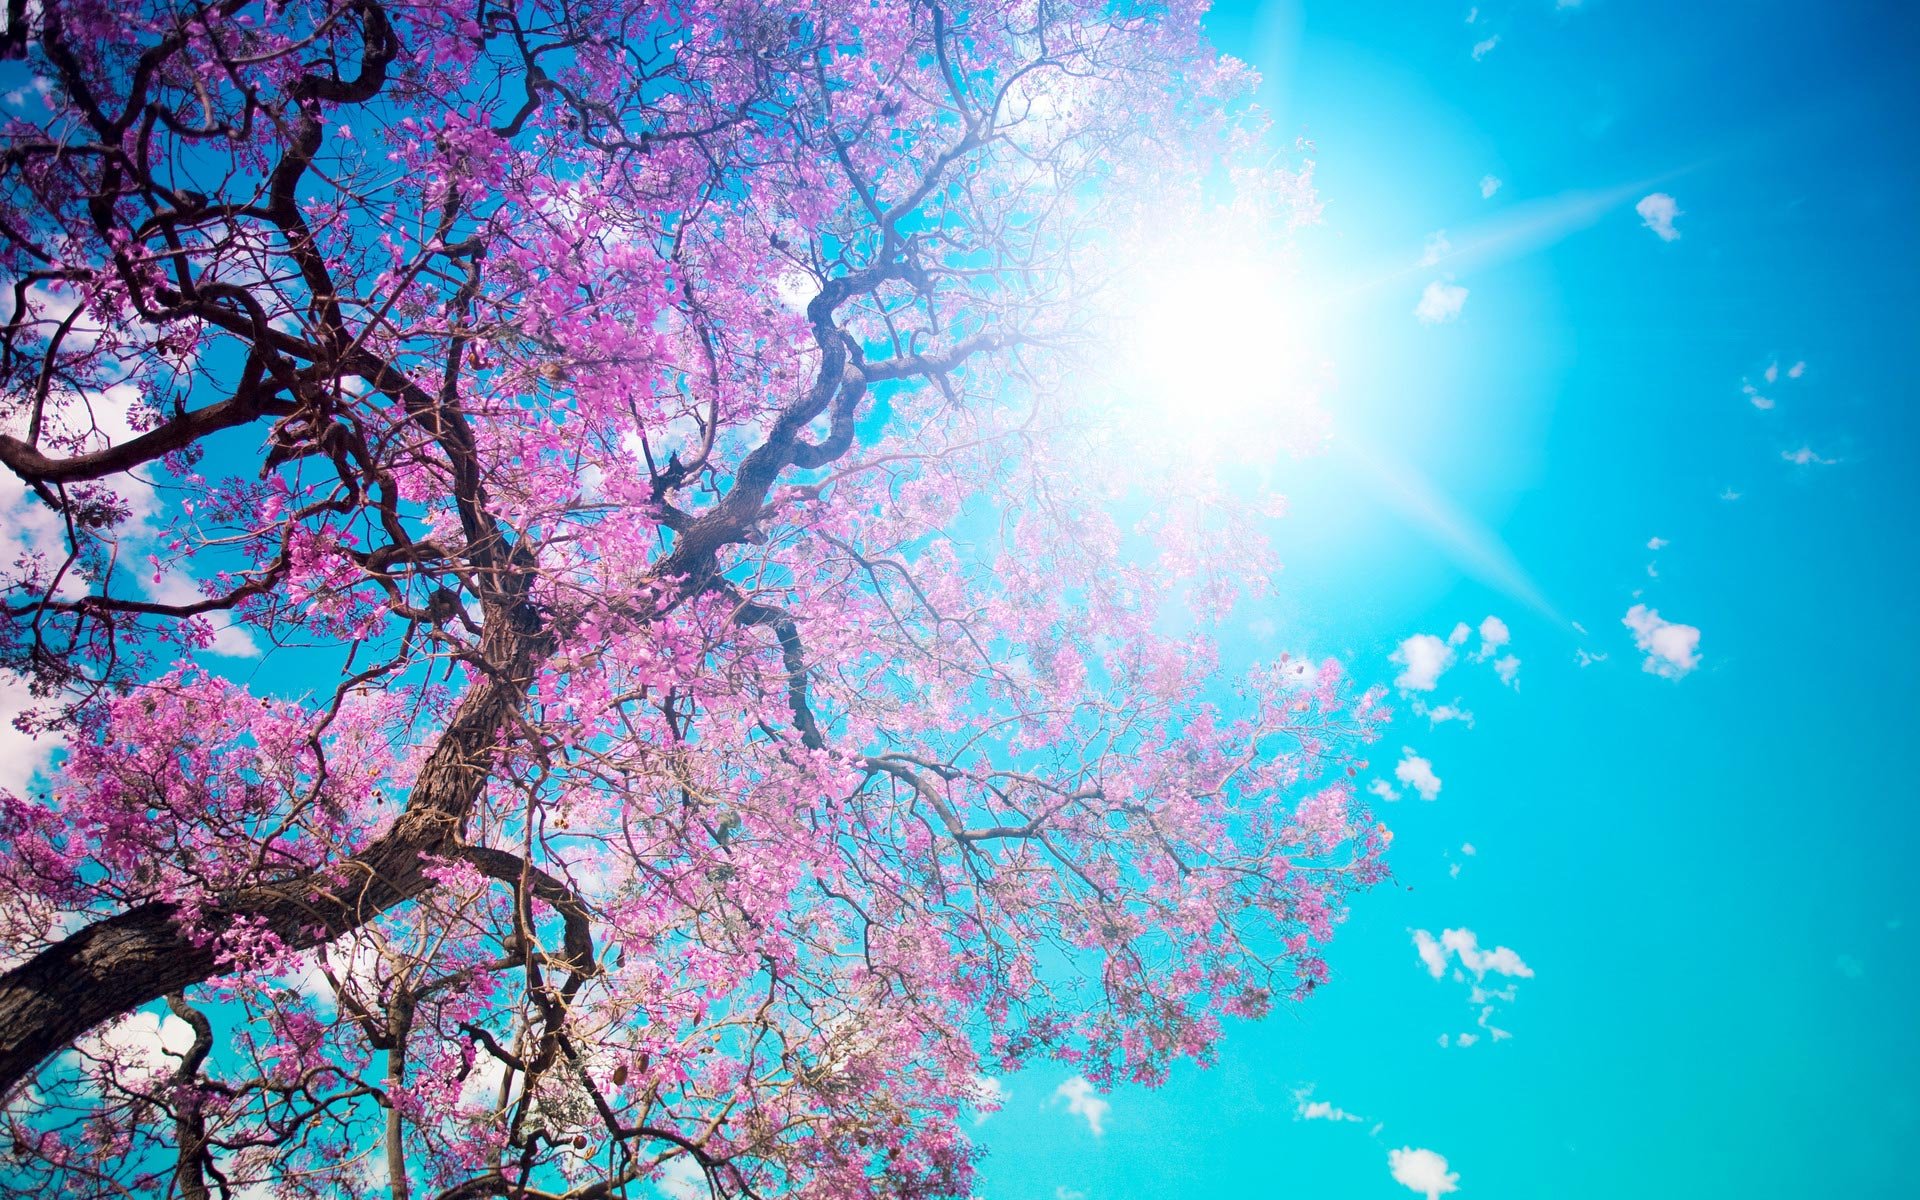  Scenery Wallpaper   Includes the Scene of Blooming Spring Simply 1920x1200